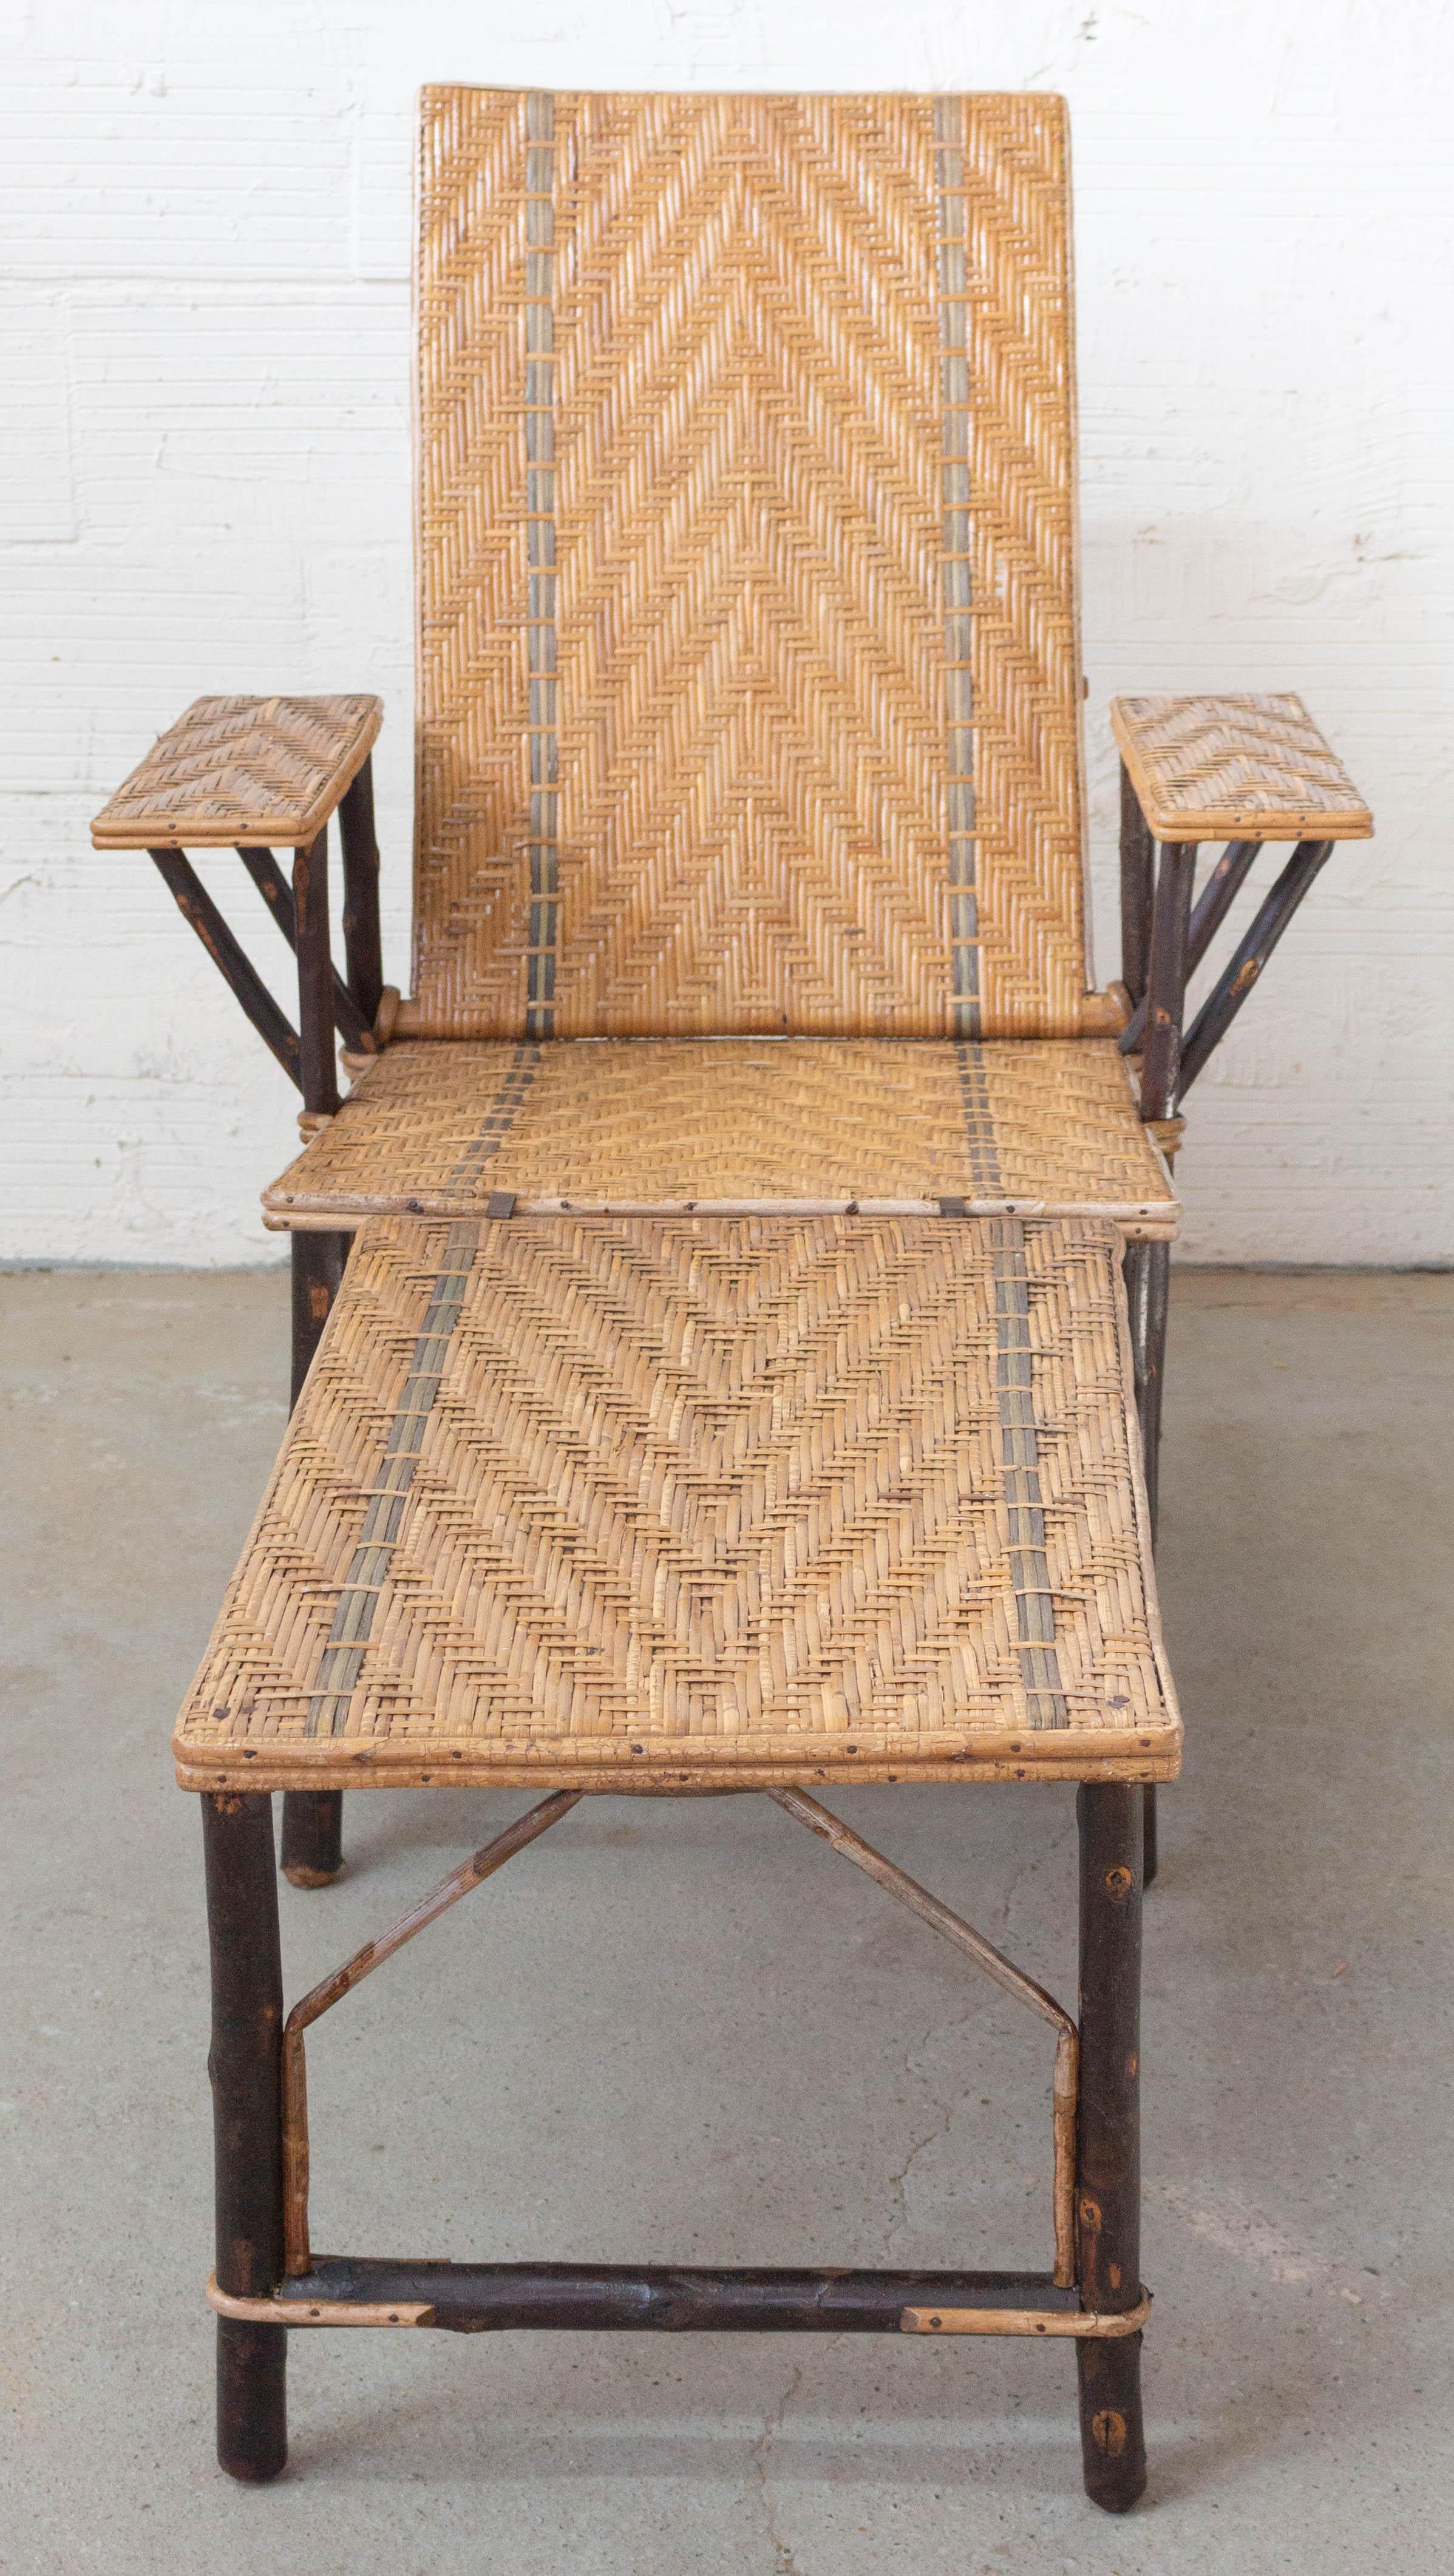 French rattan folding deck chair or lounger chair, circa 1930
Handwoven with a green stripe
Very comfortable for patio or garden
Folded dimensions H 24.21 x W 29.7 x D 31.3 in. (H 61.5 x W 75.5 x D 79.5 cm)
Good condition.

Shipping:
H 61.5 x